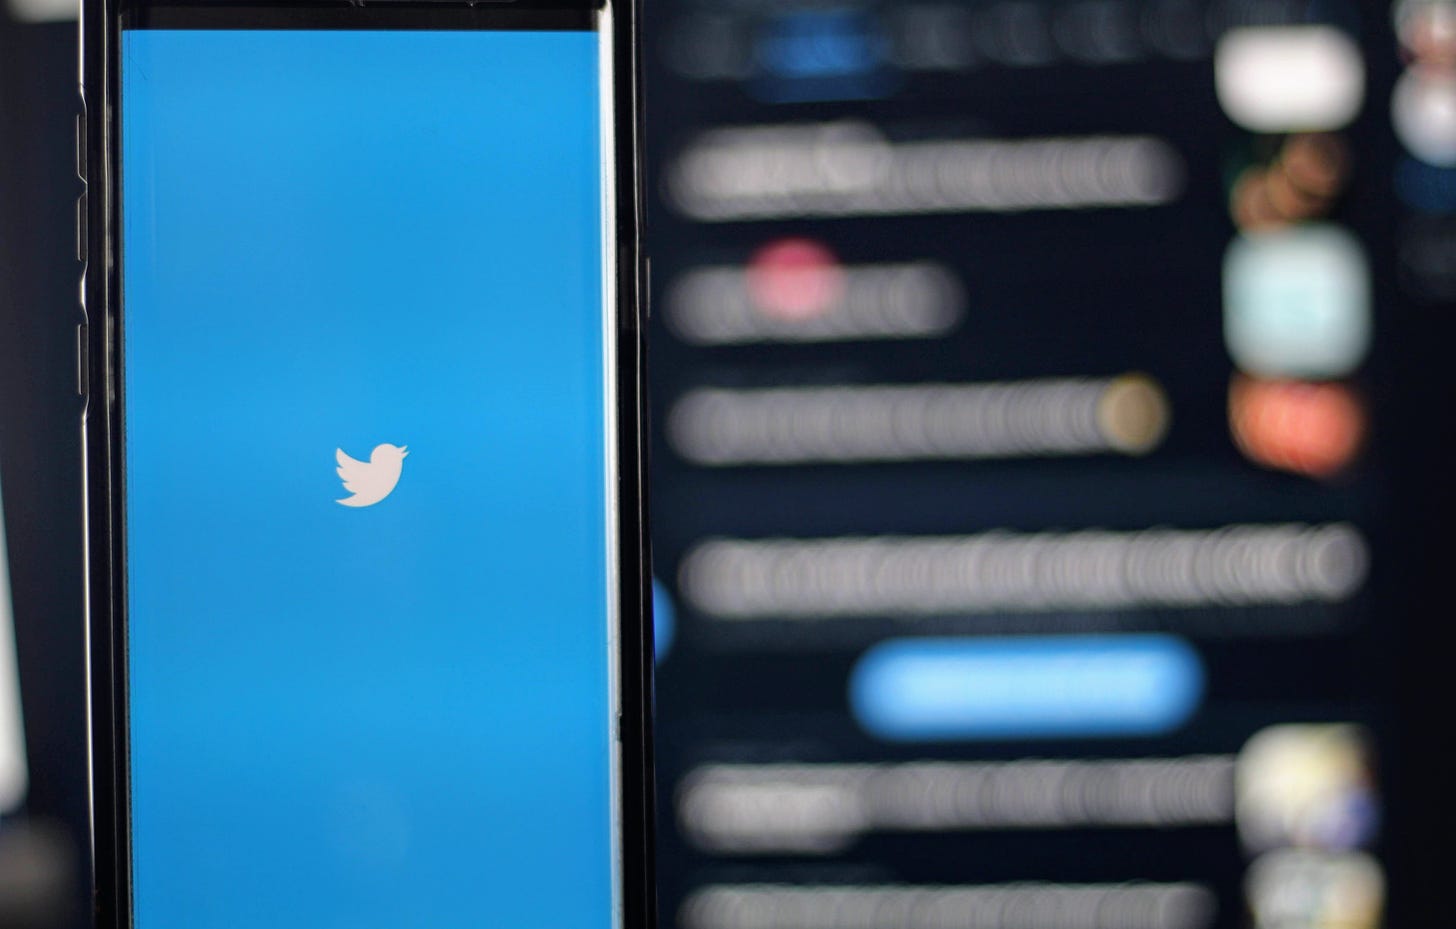 Photo illustration of the Twitter app against a blurred backdrop of tweets (Joshua Hoehne / Unsplash)